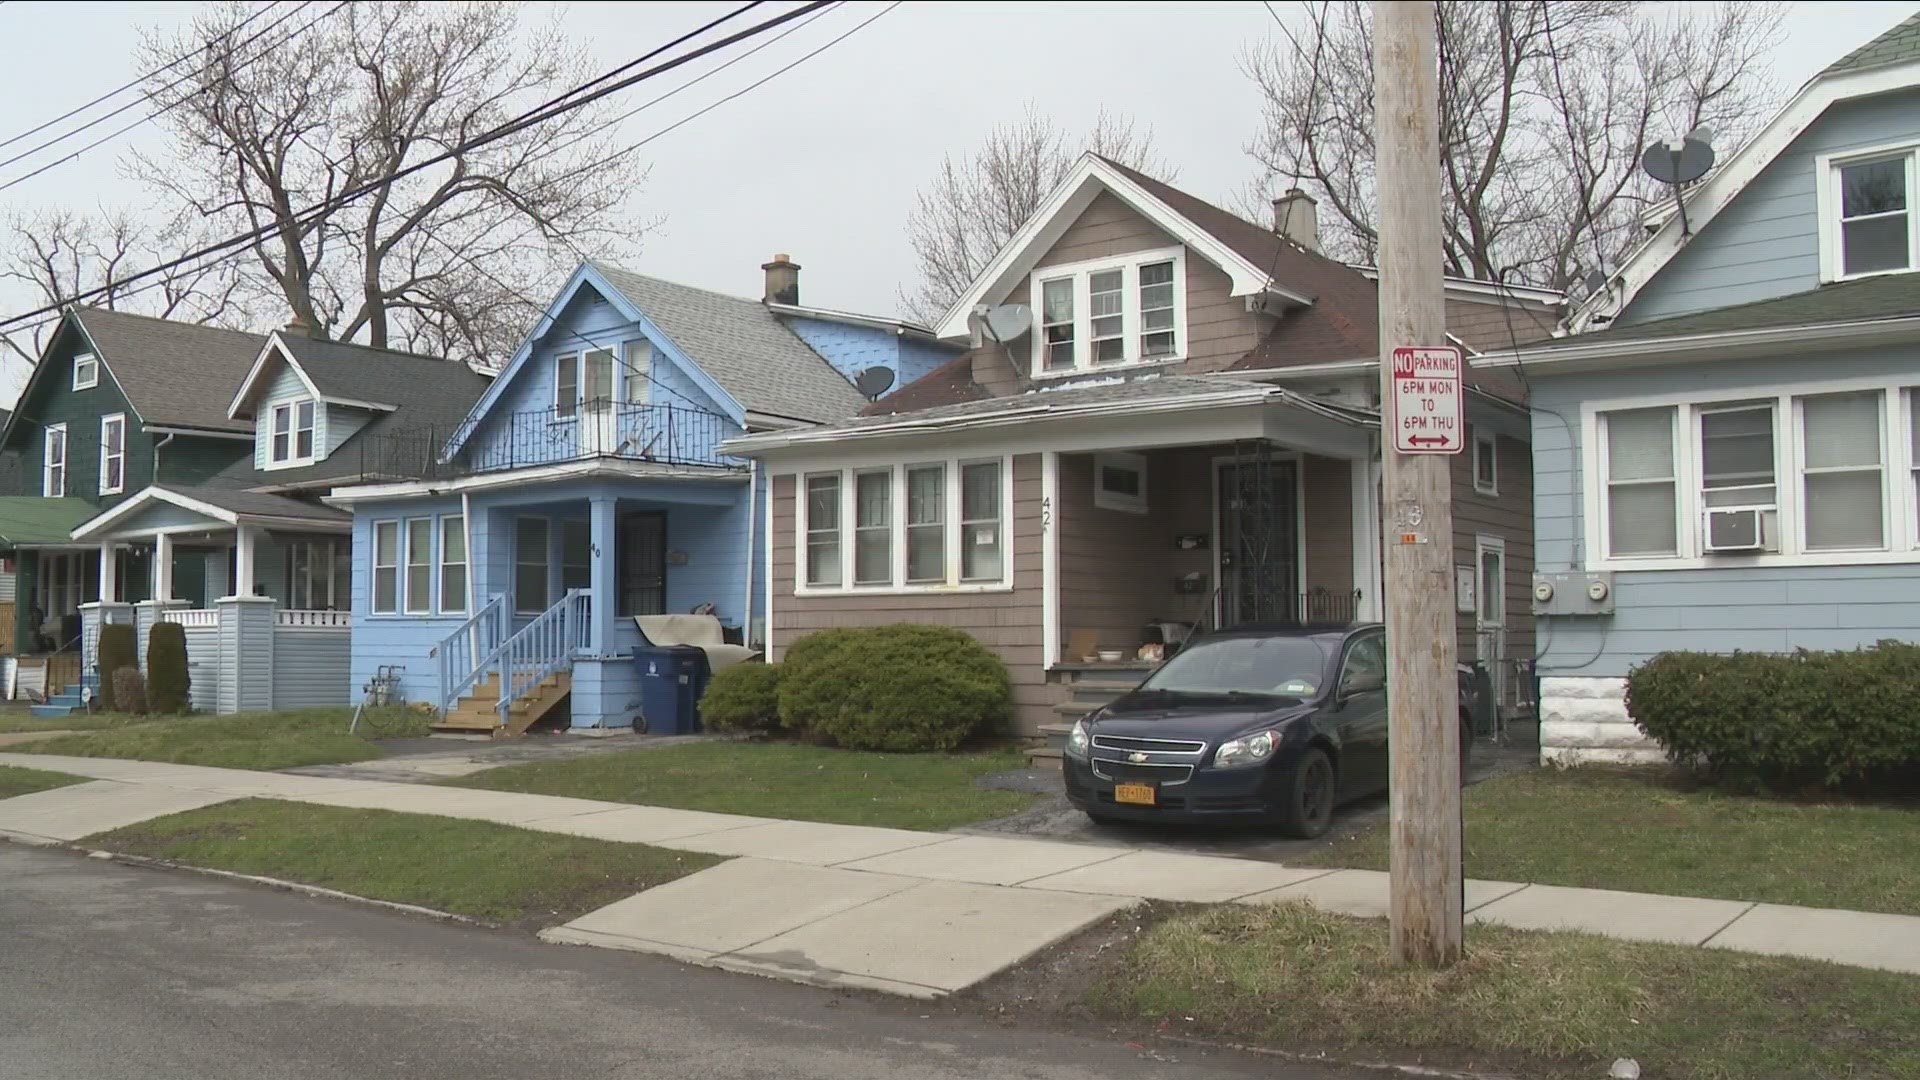 Farhad Raiszadeh and his wife, Shohre Zahedi who live in California are accused of violating lead safety laws at 46 properties in East Buffalo and one in Cheektowaga